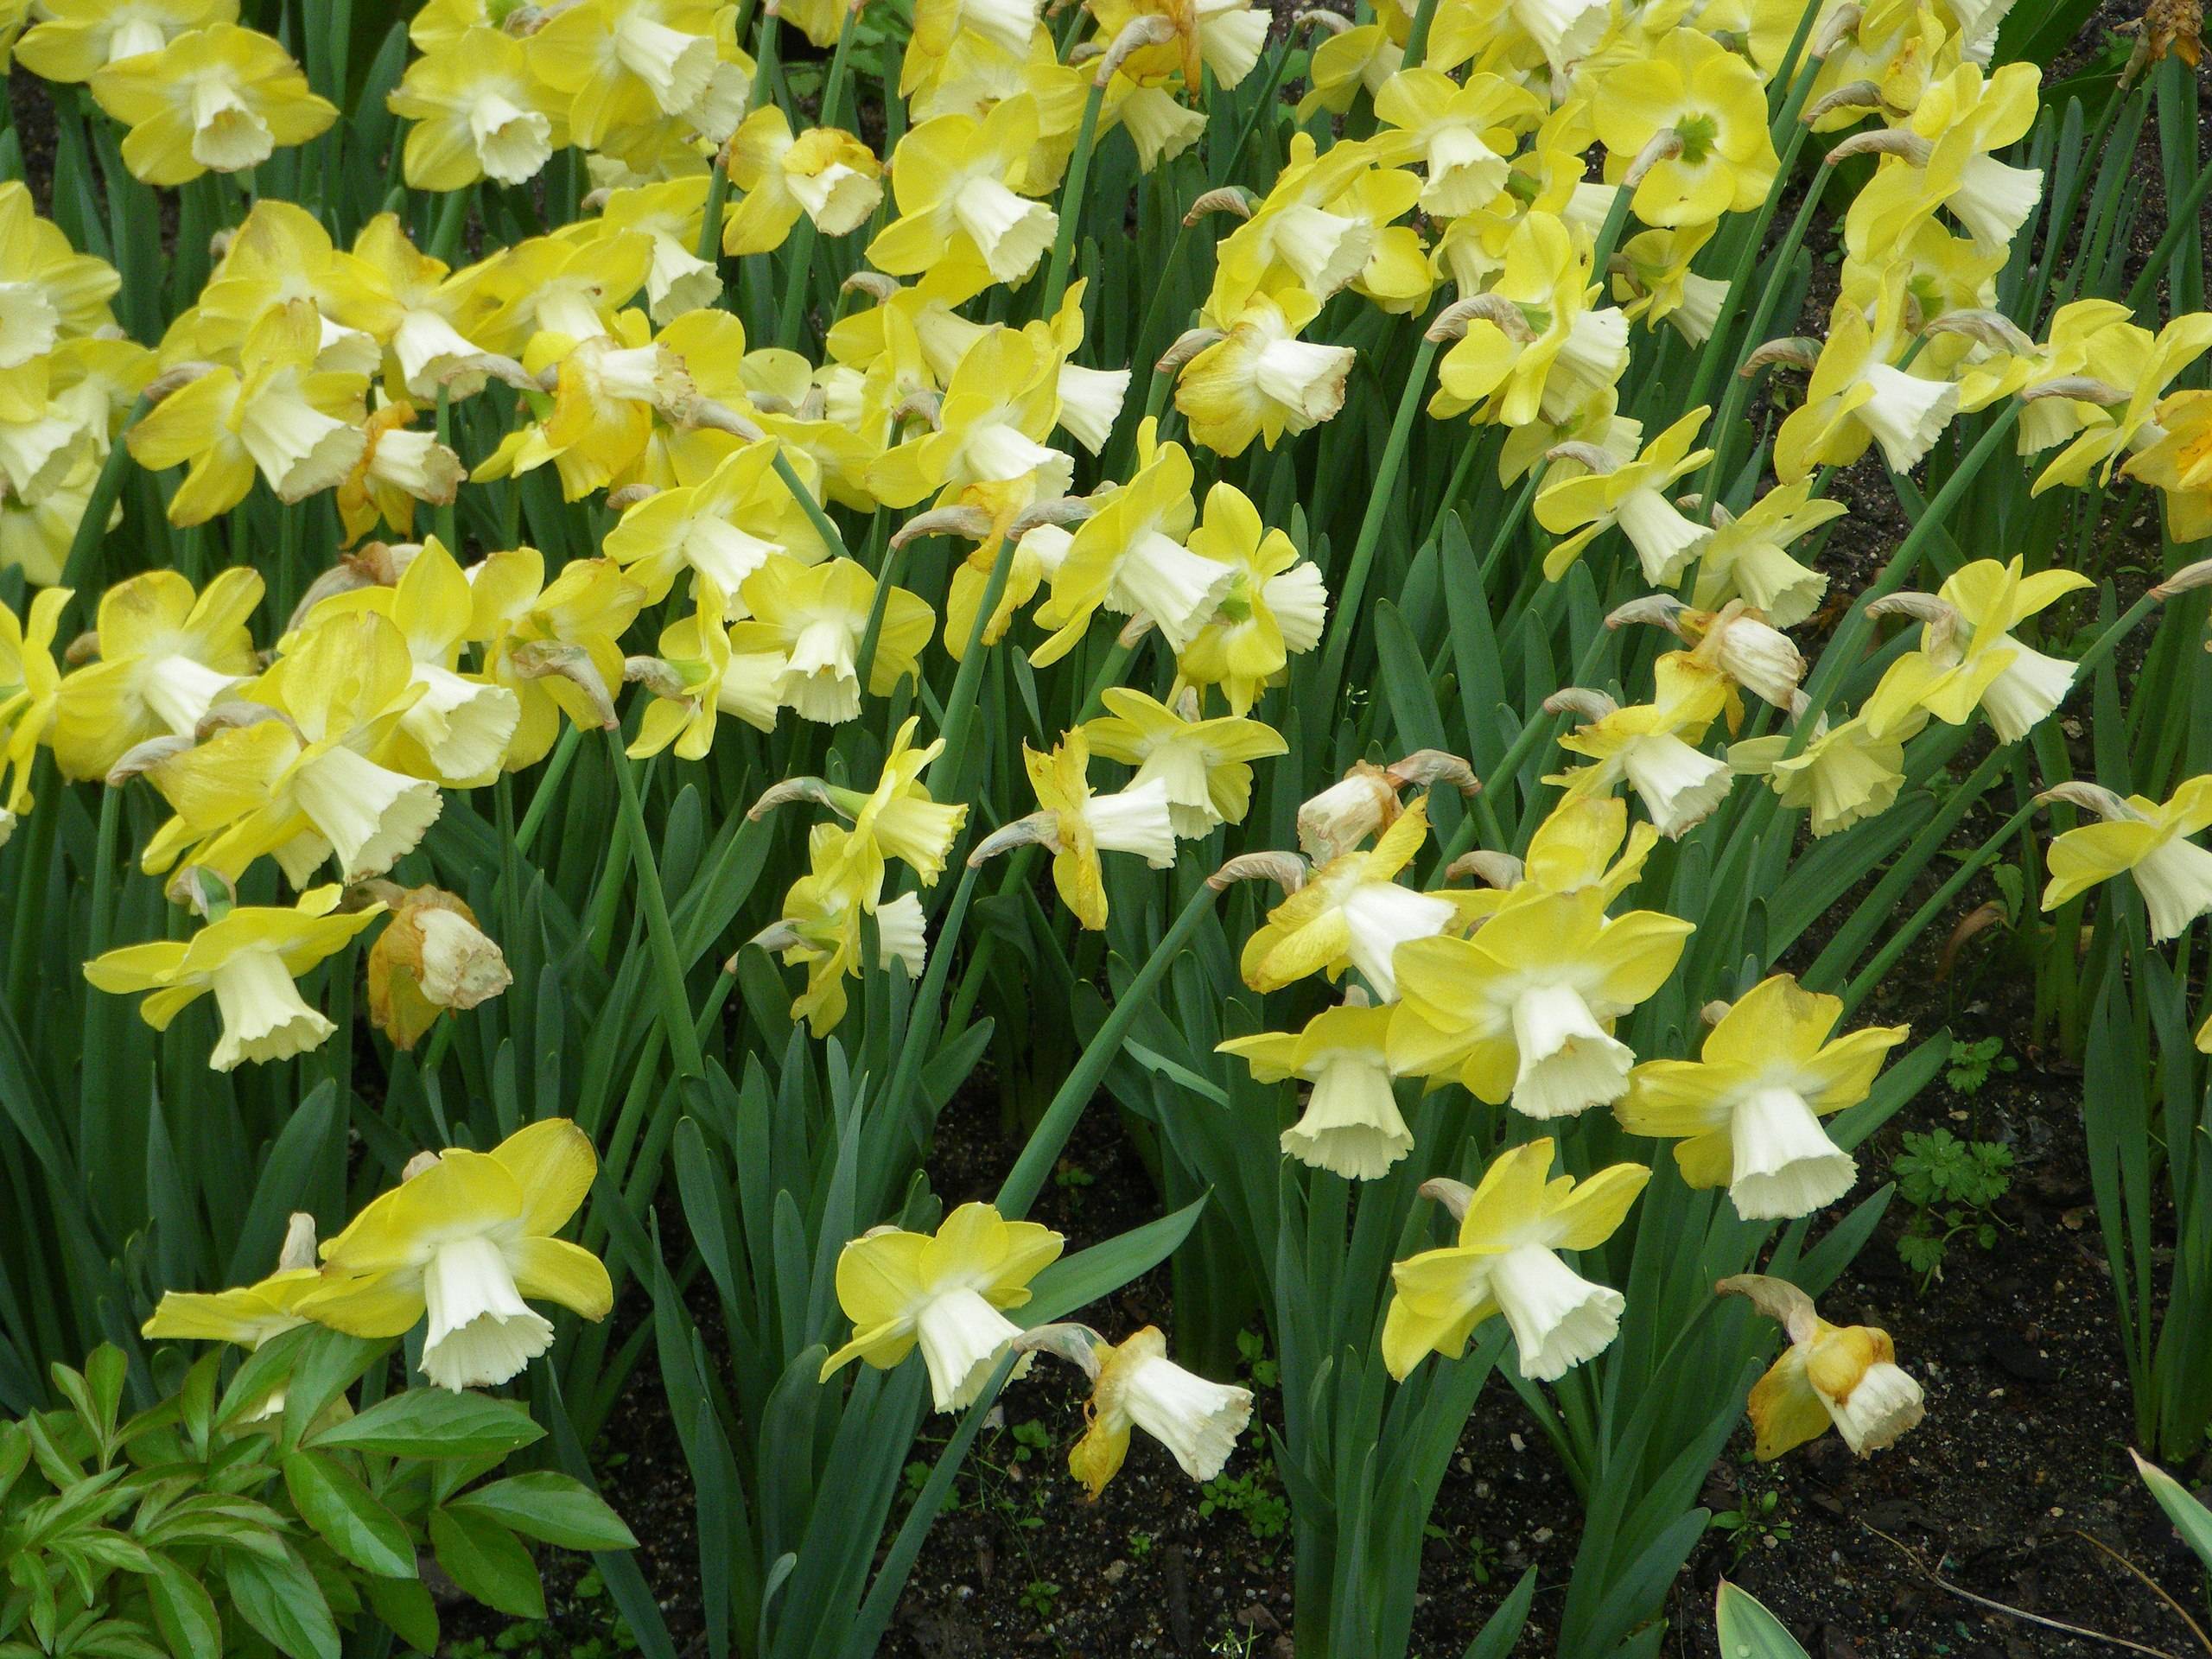 yellow-white flowers with green leaves and stems